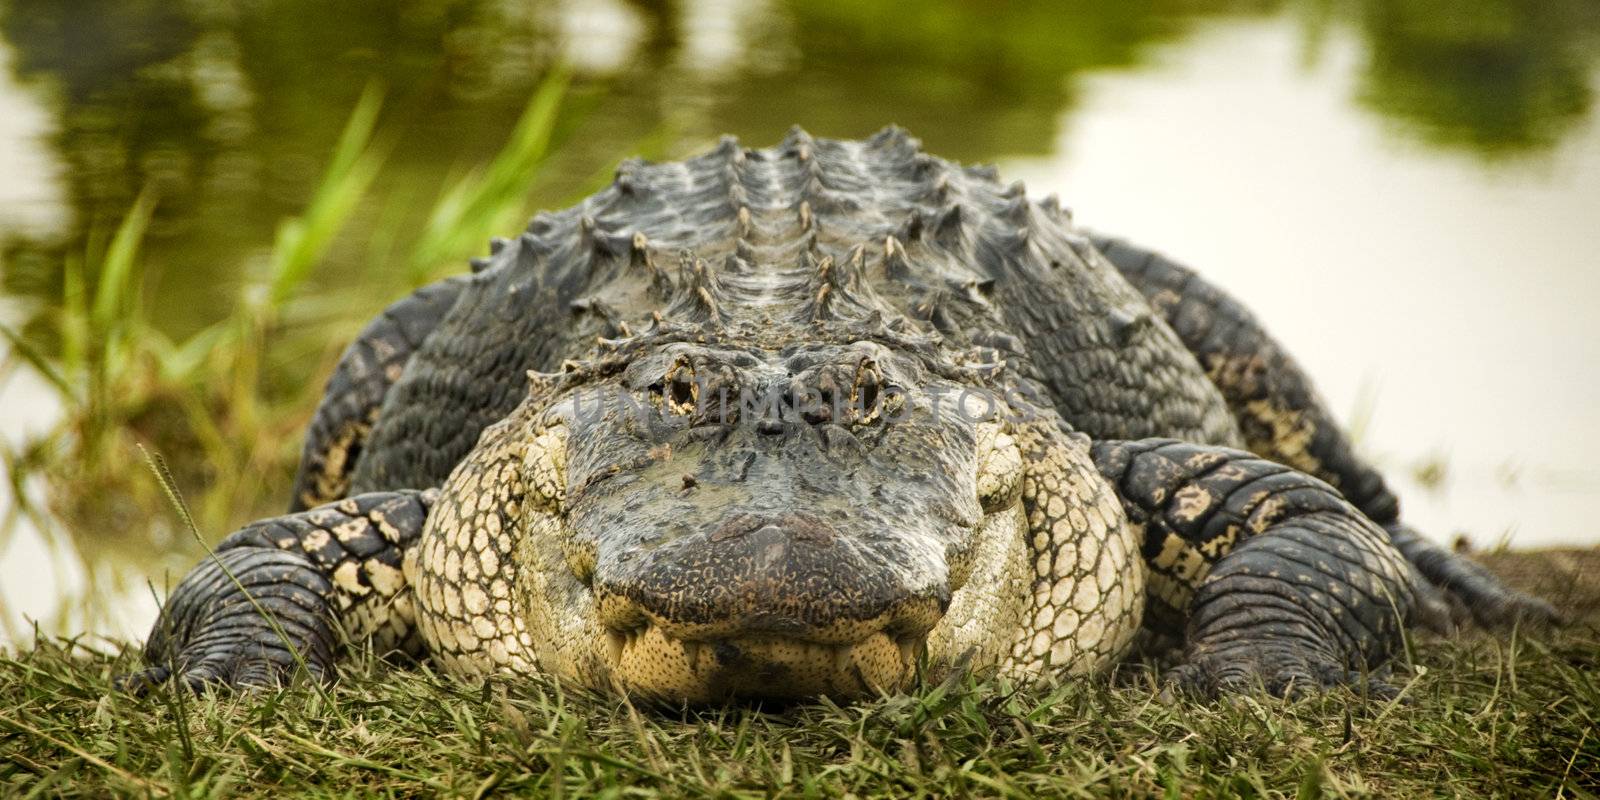 Close up front view of a large American Alligator (Alligator mississippiensis) basking in the grass on the edge of the water, with the reflection of trees in the water in the background.